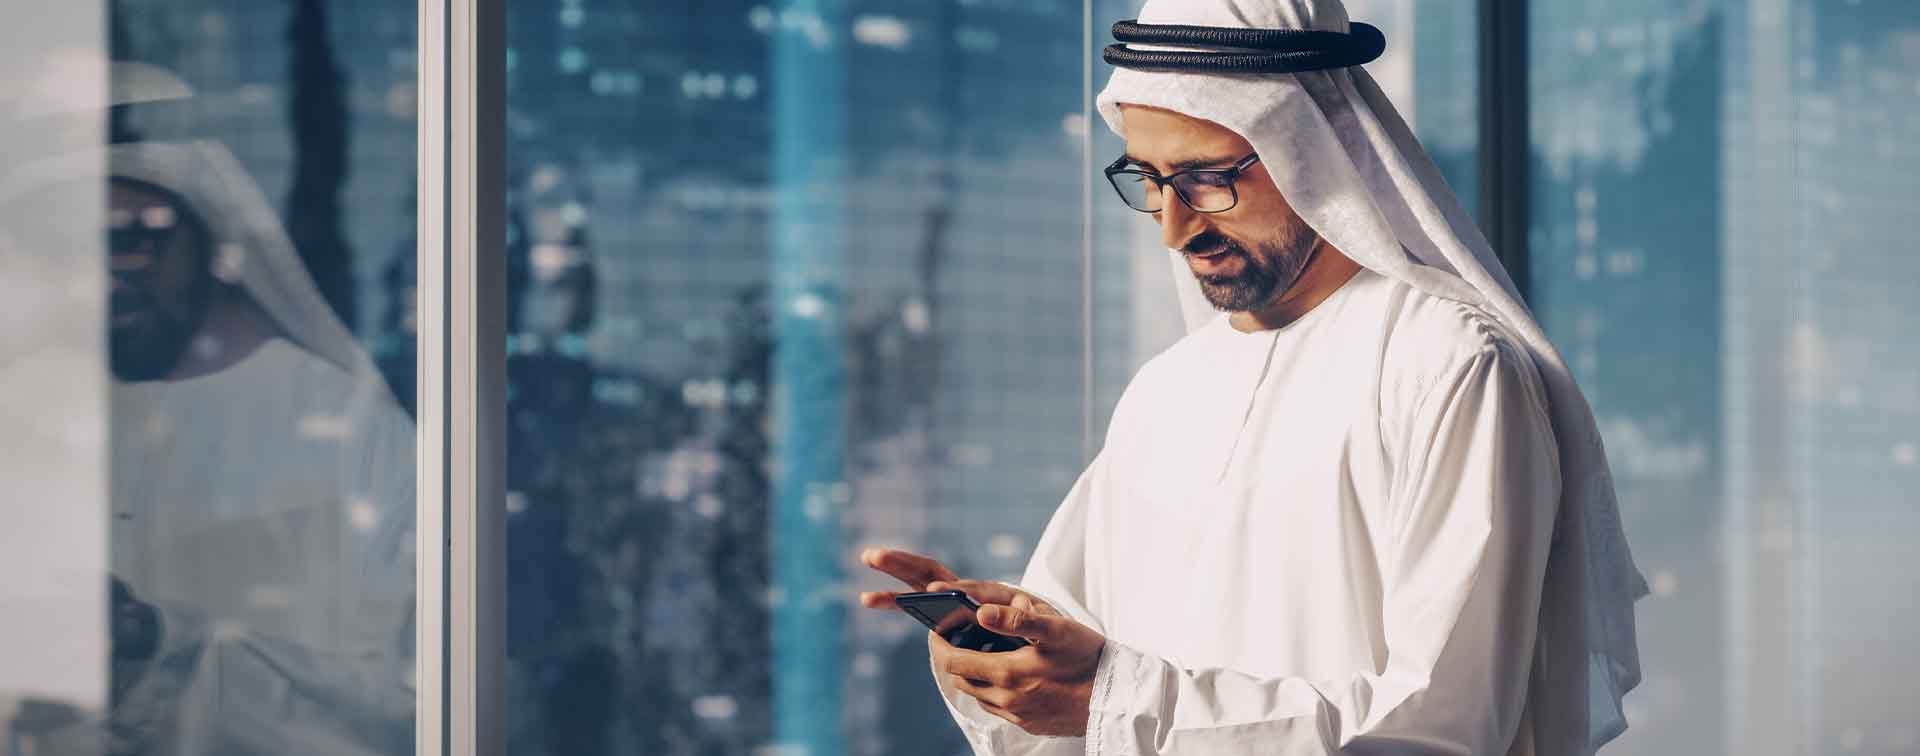 Middle Eastern businessman in traditional outfit in front of a window typing on his cellphone